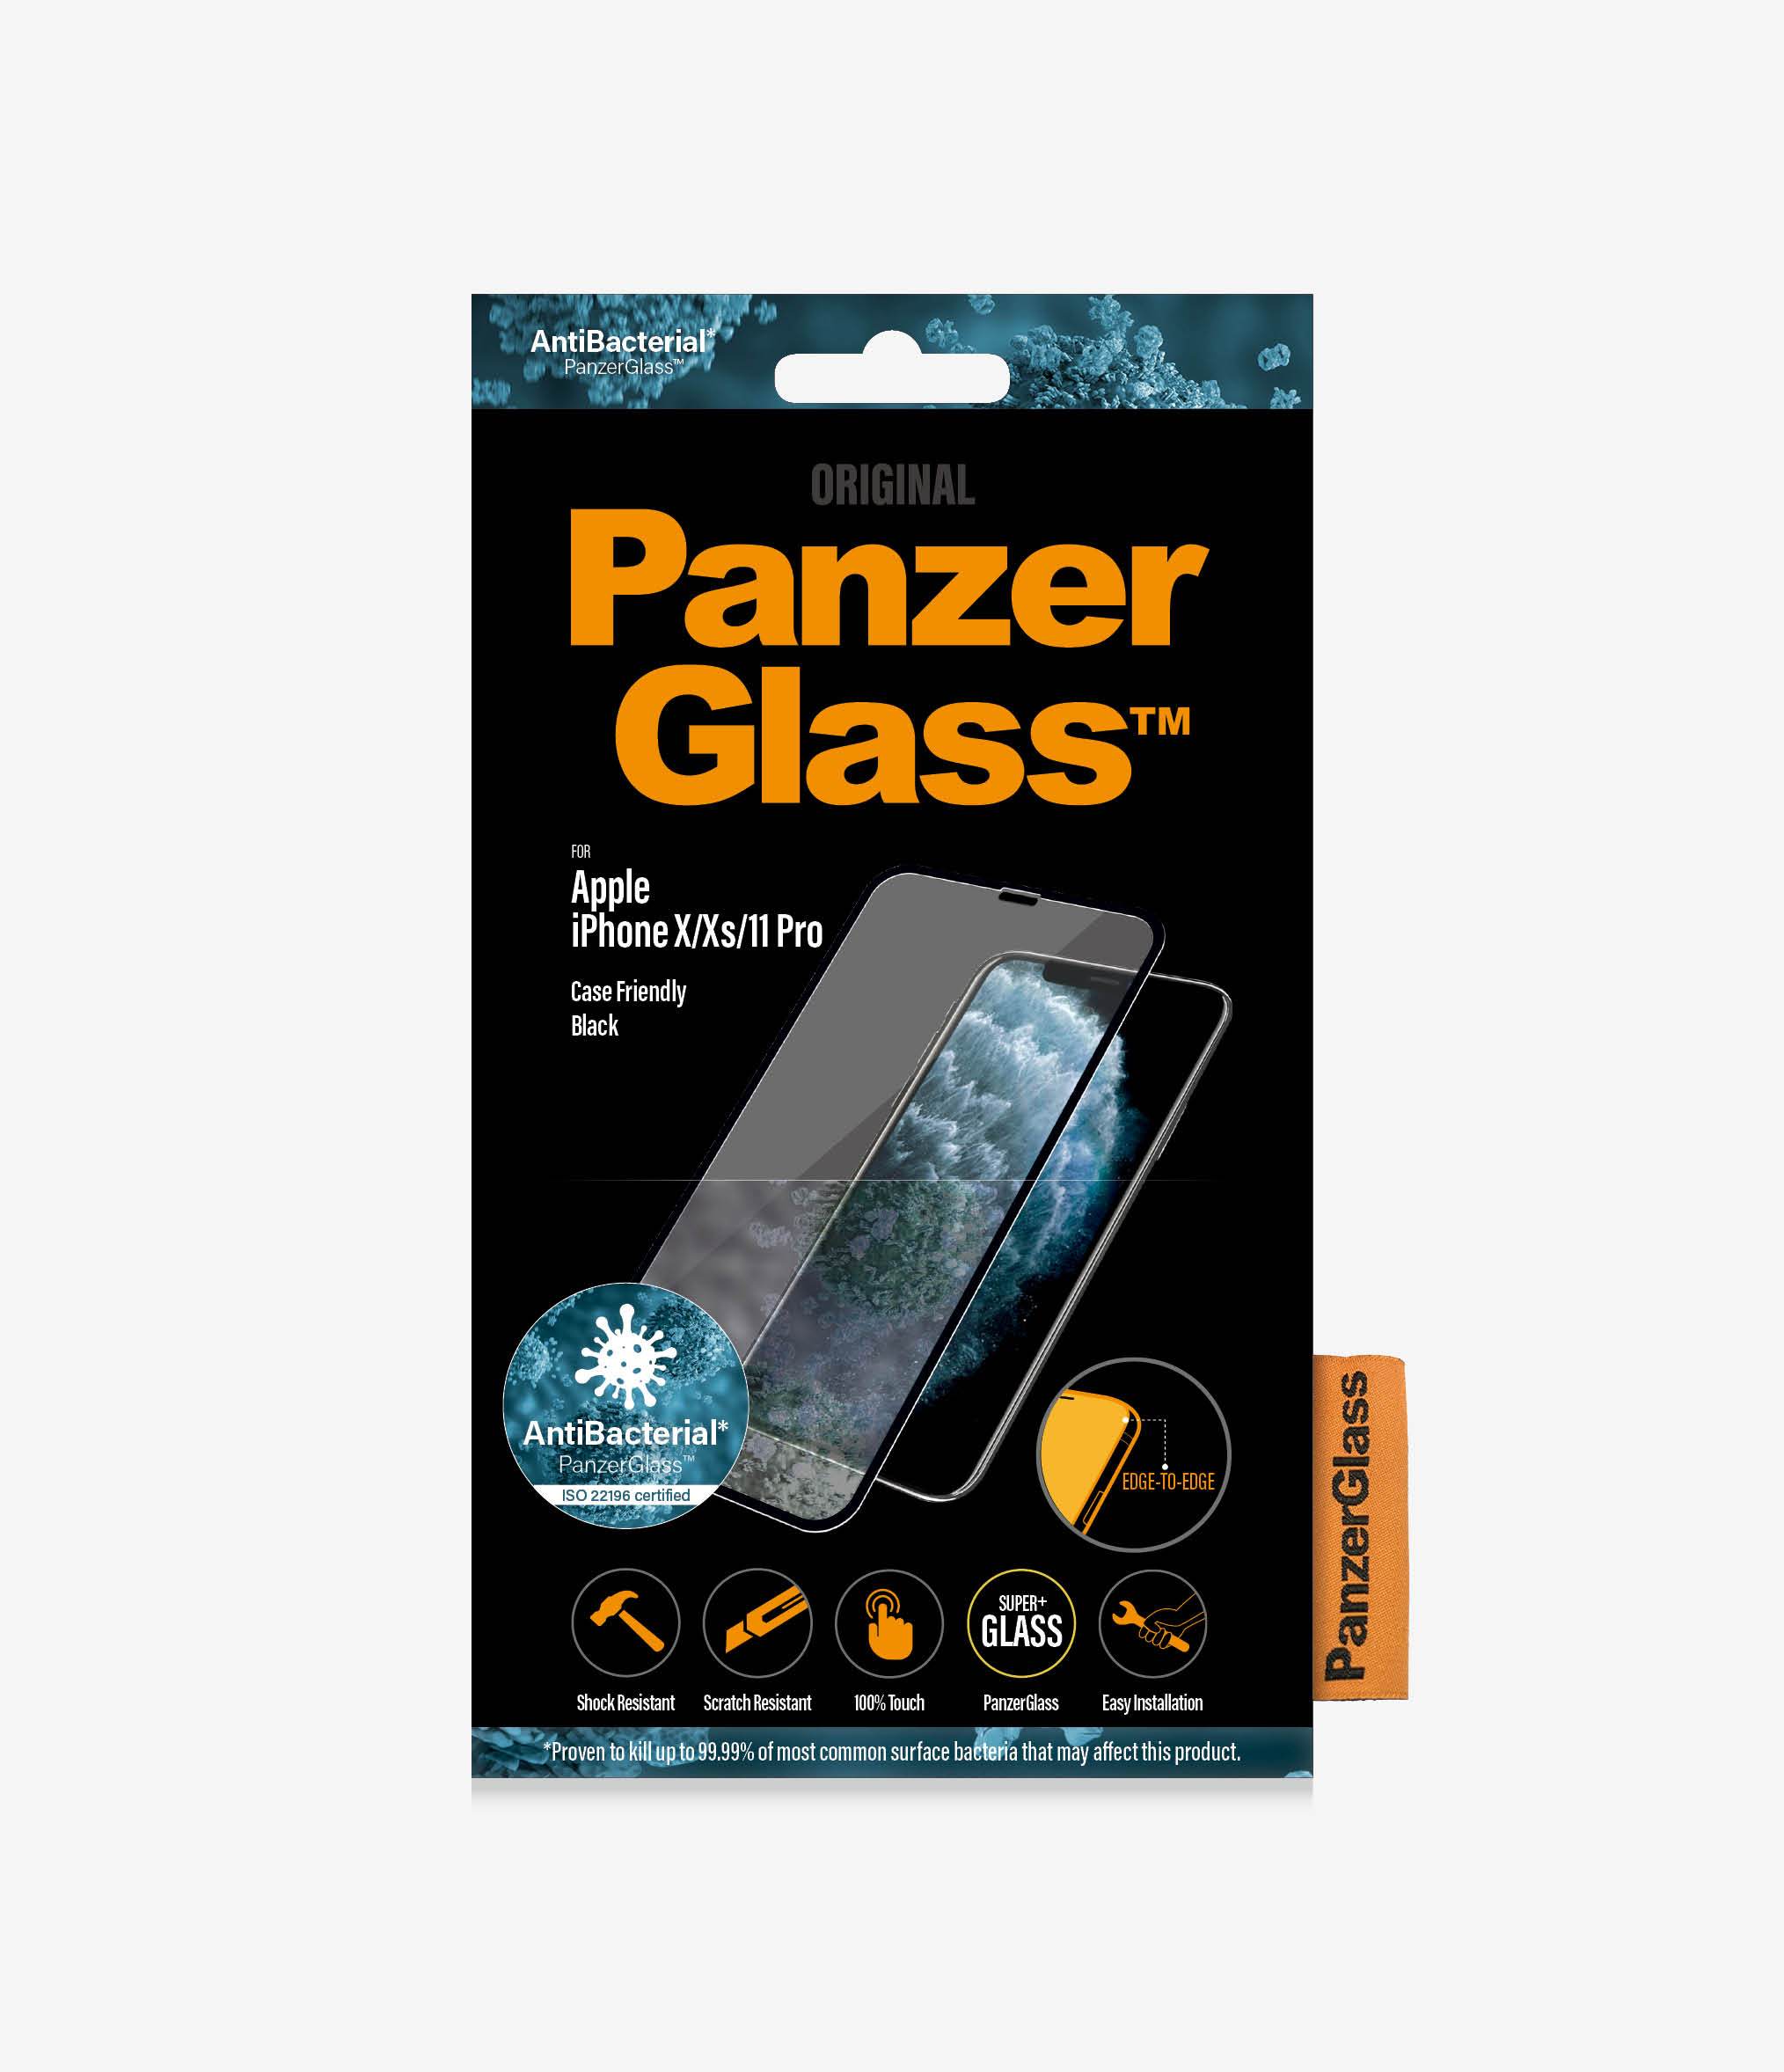 PanzerGlass™ Apple iPhone X / Xs / 11 Pro - AntiBacterial (2664) - Screen Protector -  Full frame coverage, Rounded edges, 100% touch preservation